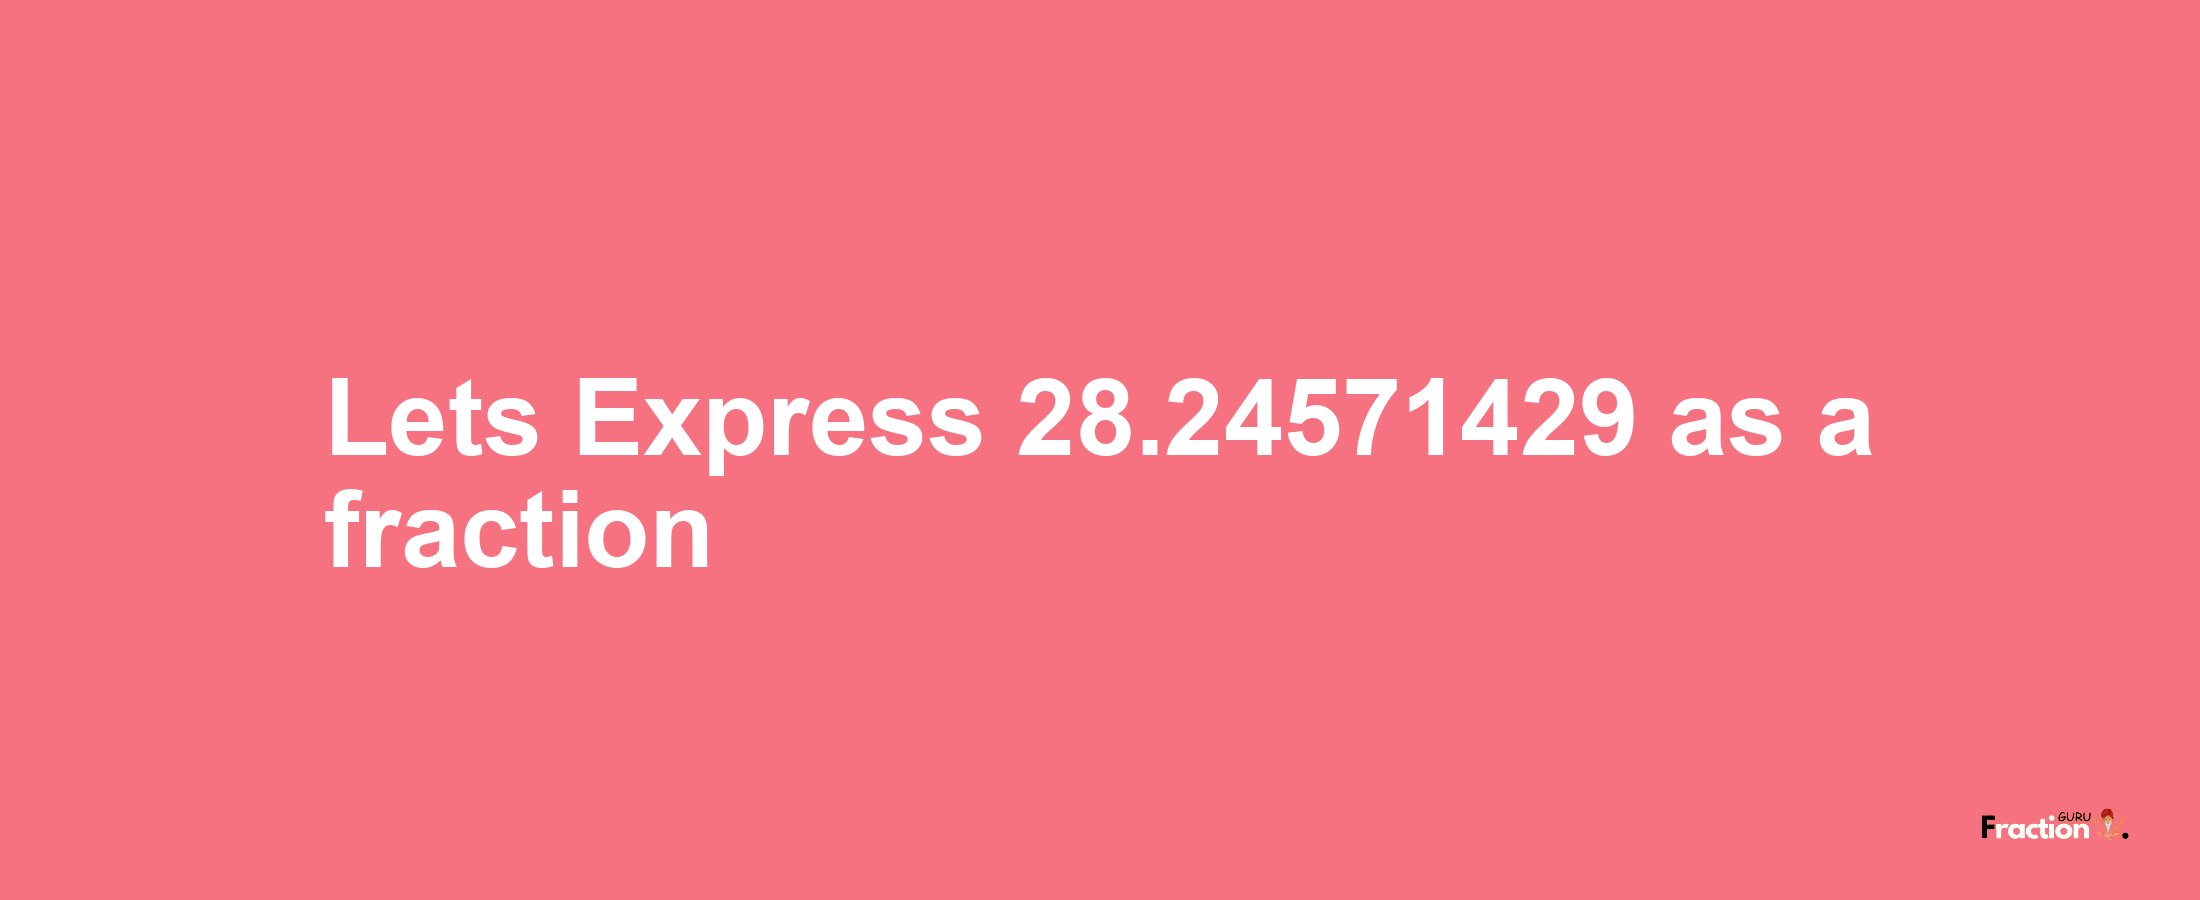 Lets Express 28.24571429 as afraction